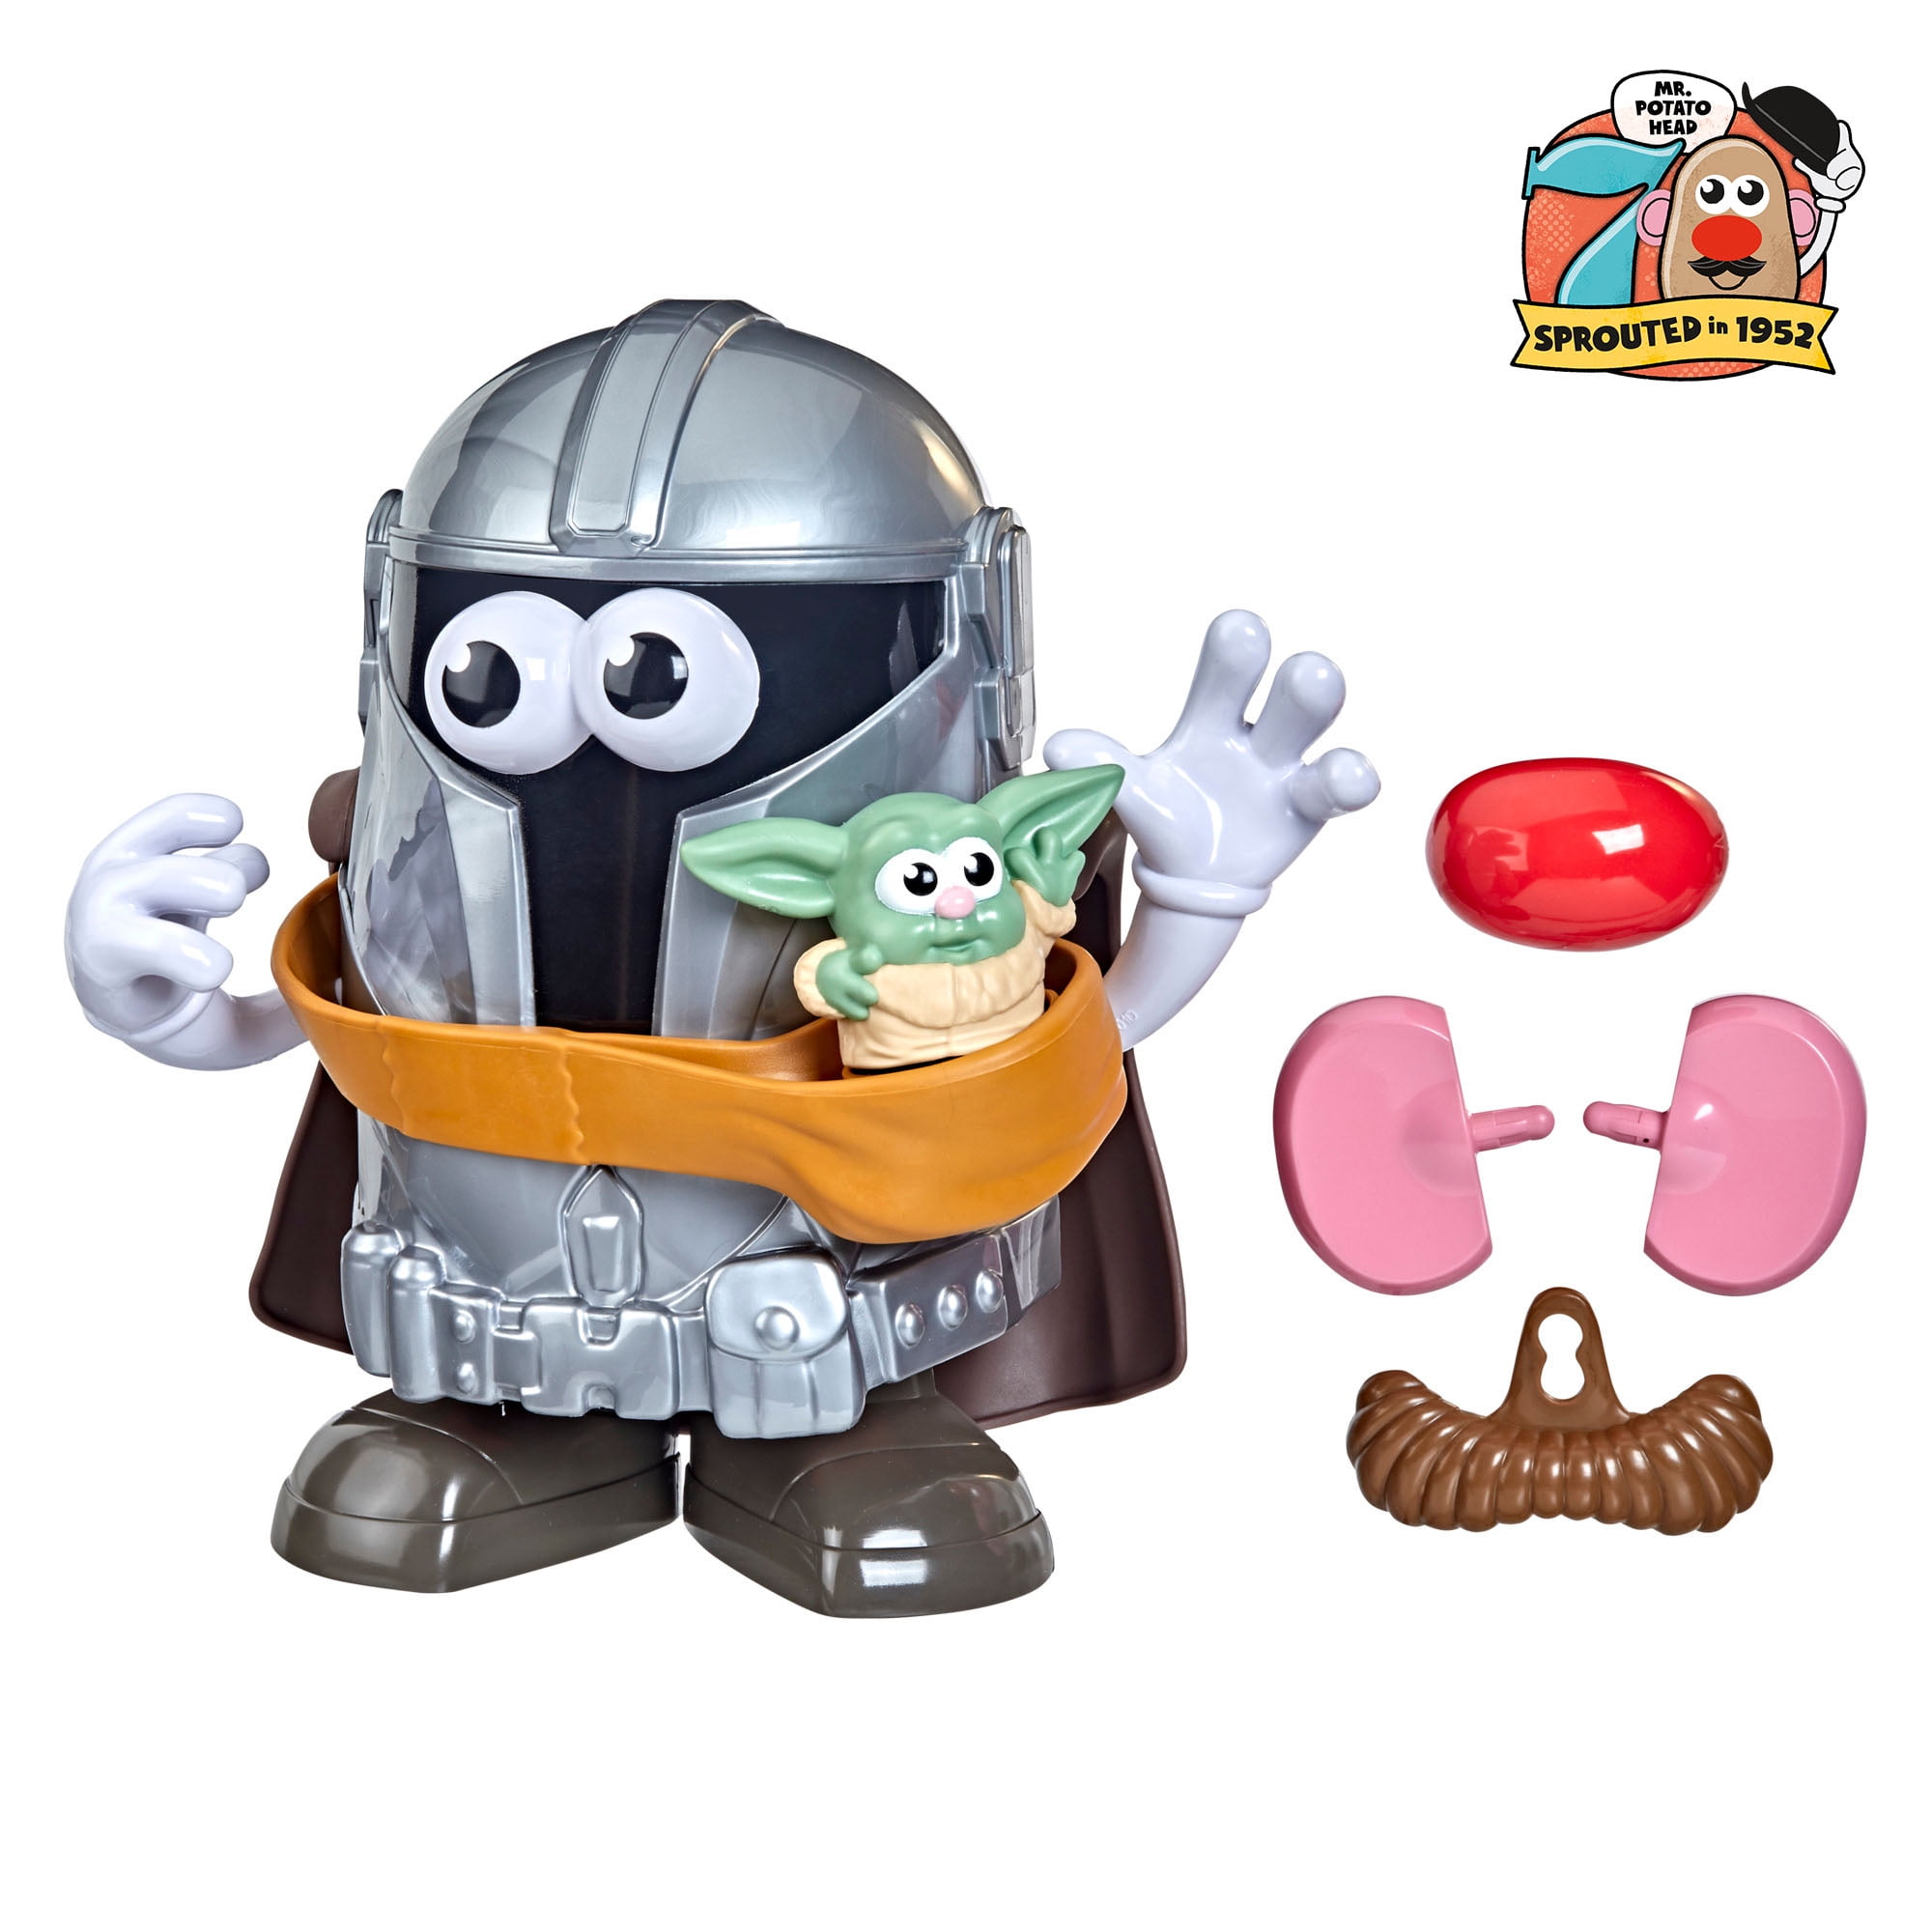 Potato Head The Yamdalorian and the Tot, Potato Head Toy, Includes 14 Parts  and Pieces 